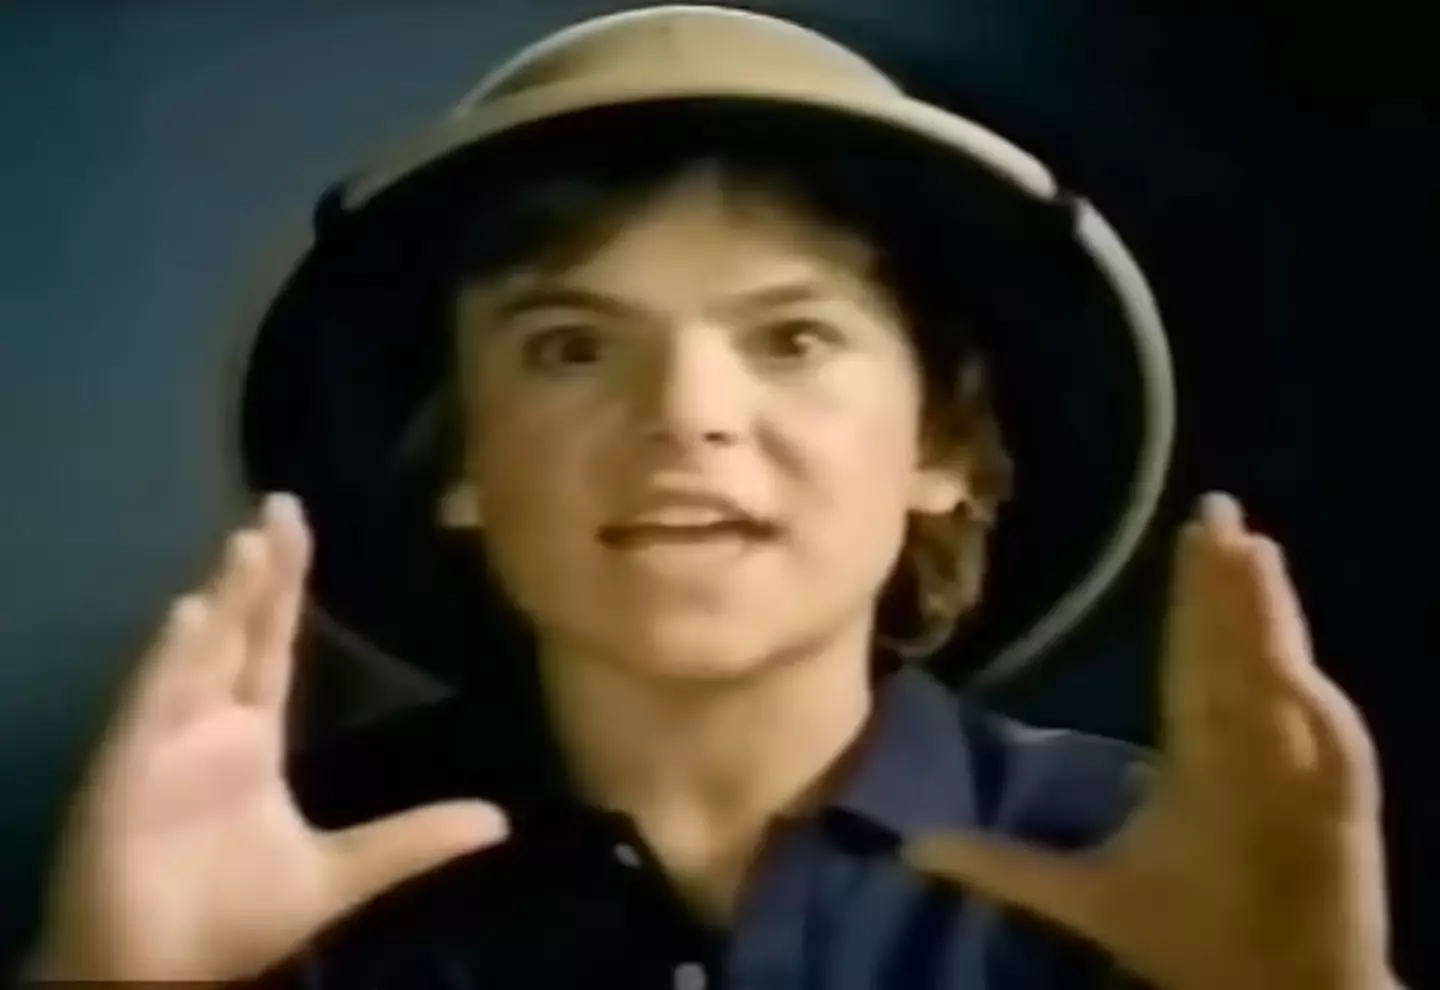 A young Jack Black in his first ever acting role, it wouldn't be the last time he'd wear that hat.